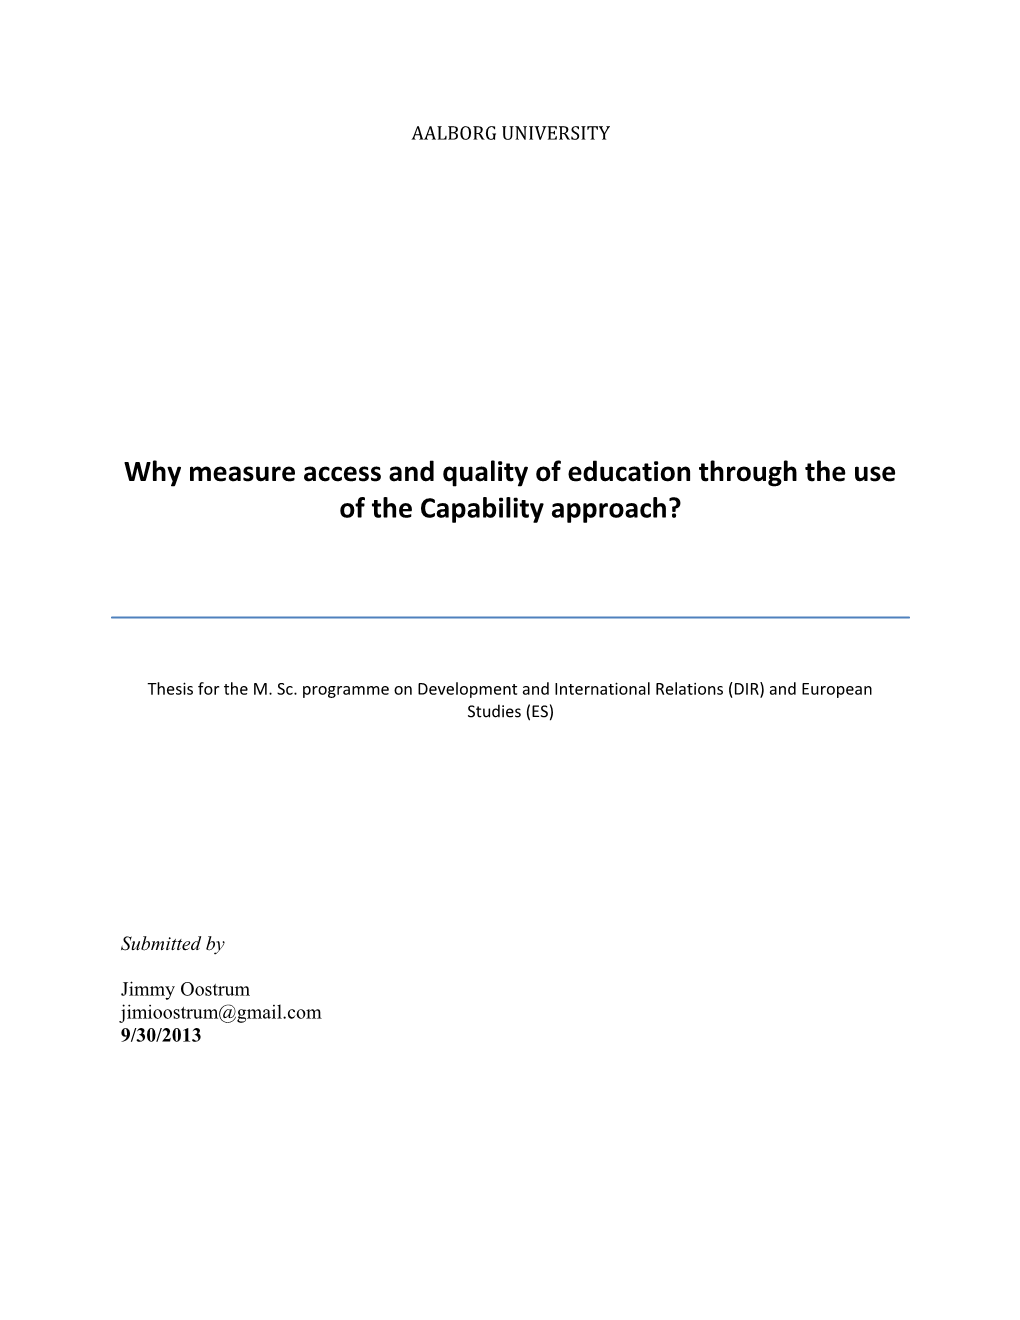 Why Measure Access and Quality of Education Through the Use of the Capability Approach?